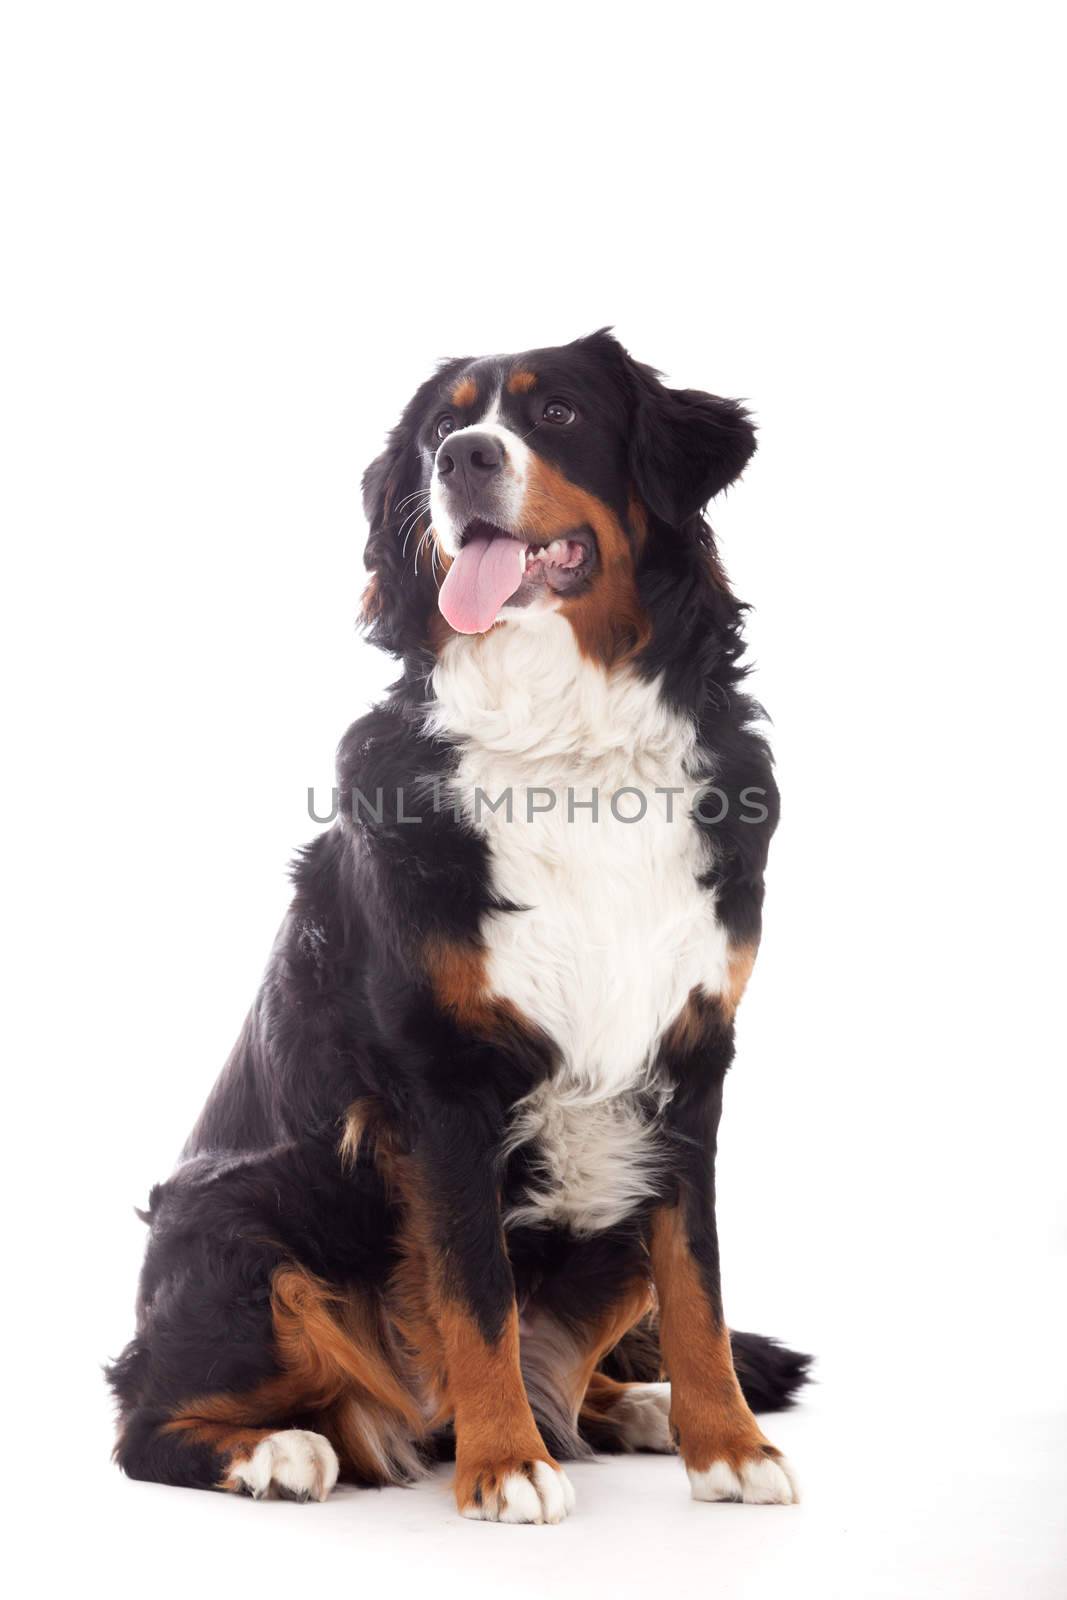  Bernese mountain dog on white by DNFStyle